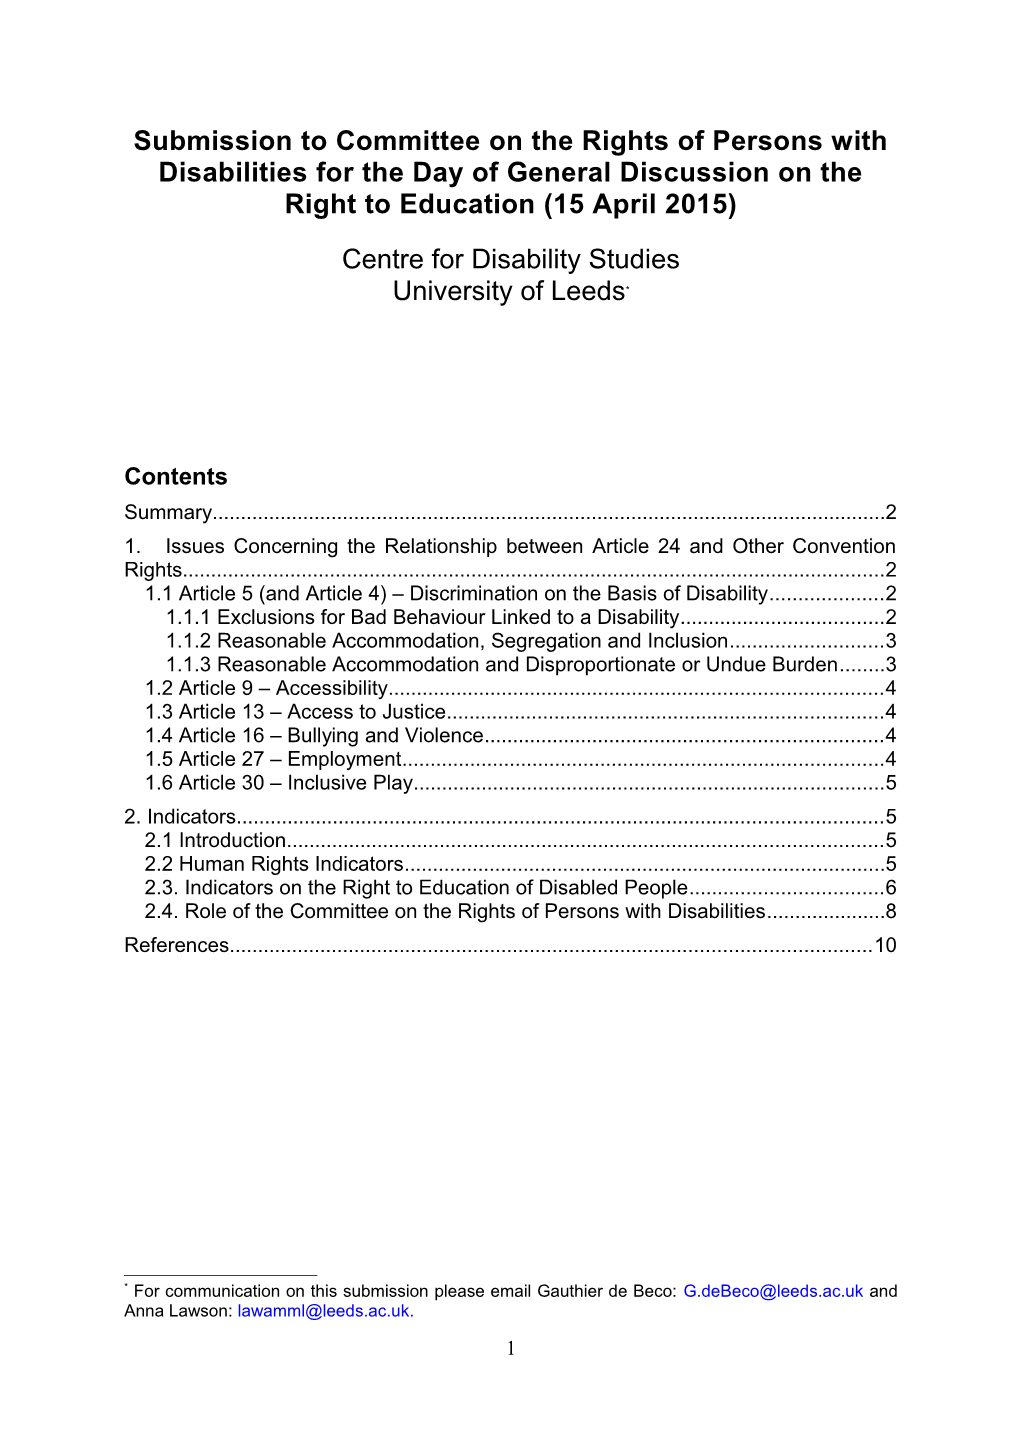 Centre for Disability Studies-University of Leeds in Word